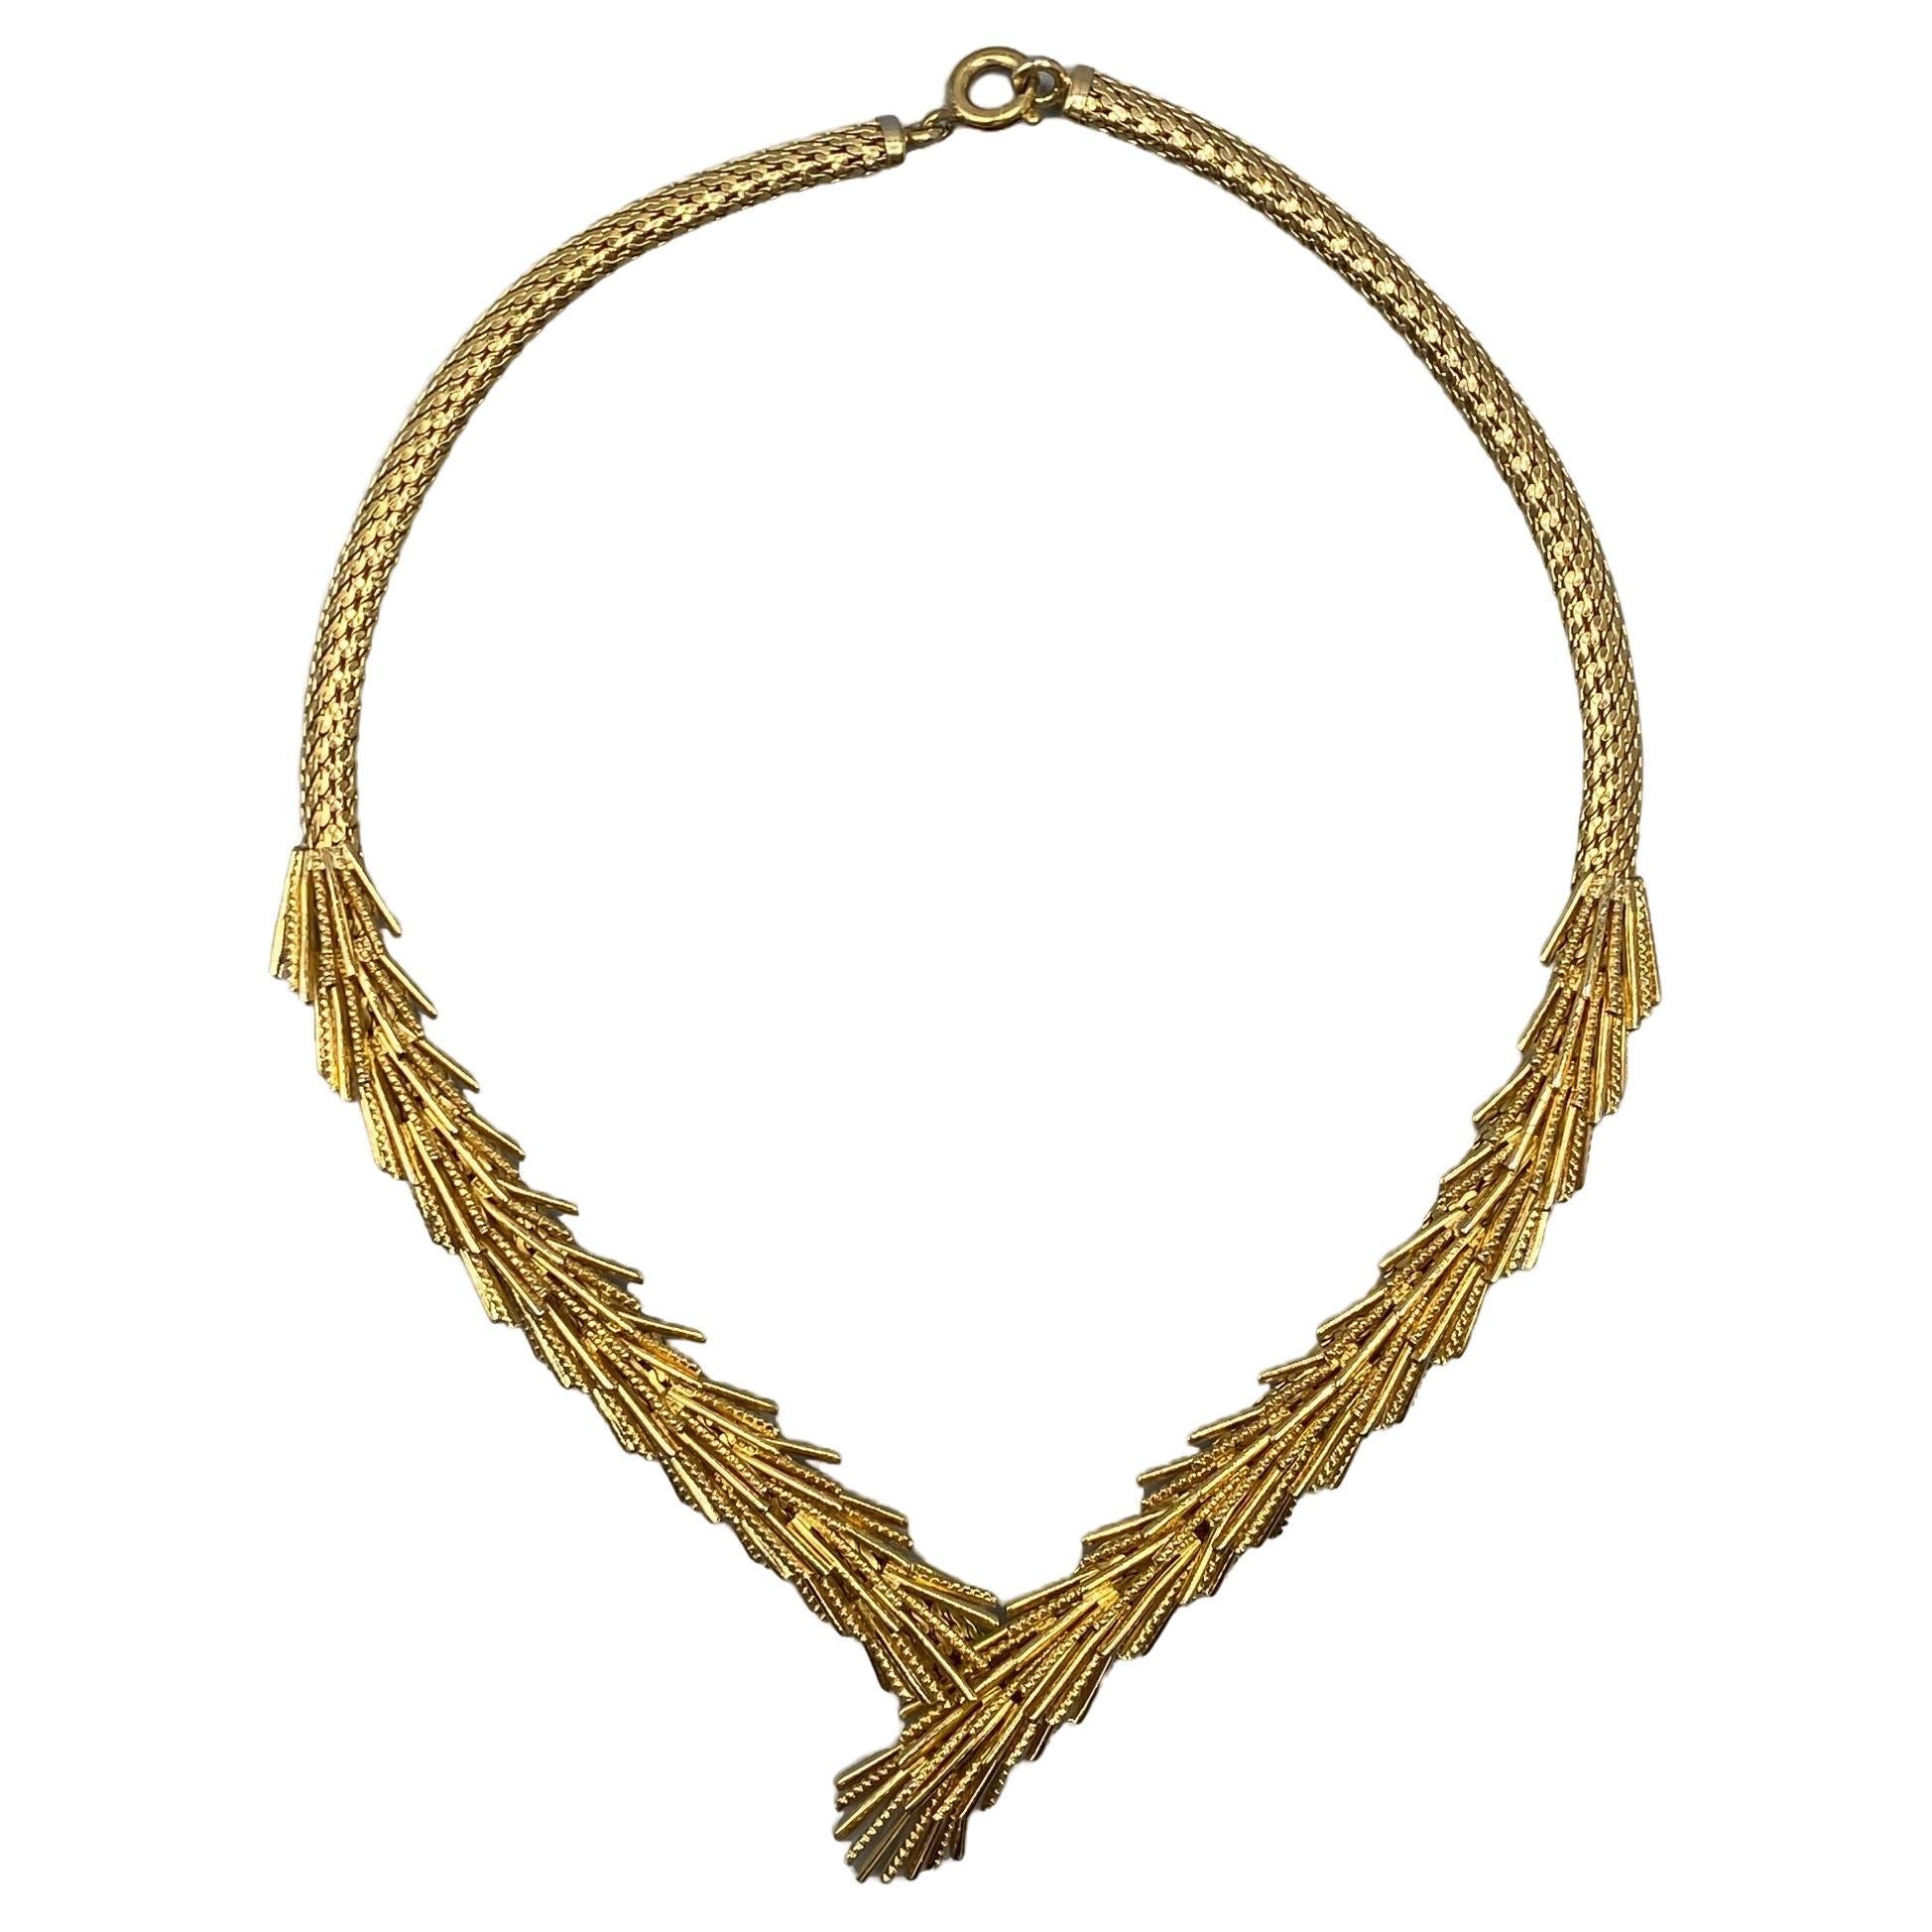 Grosse Germany Gold Necklace from 1958